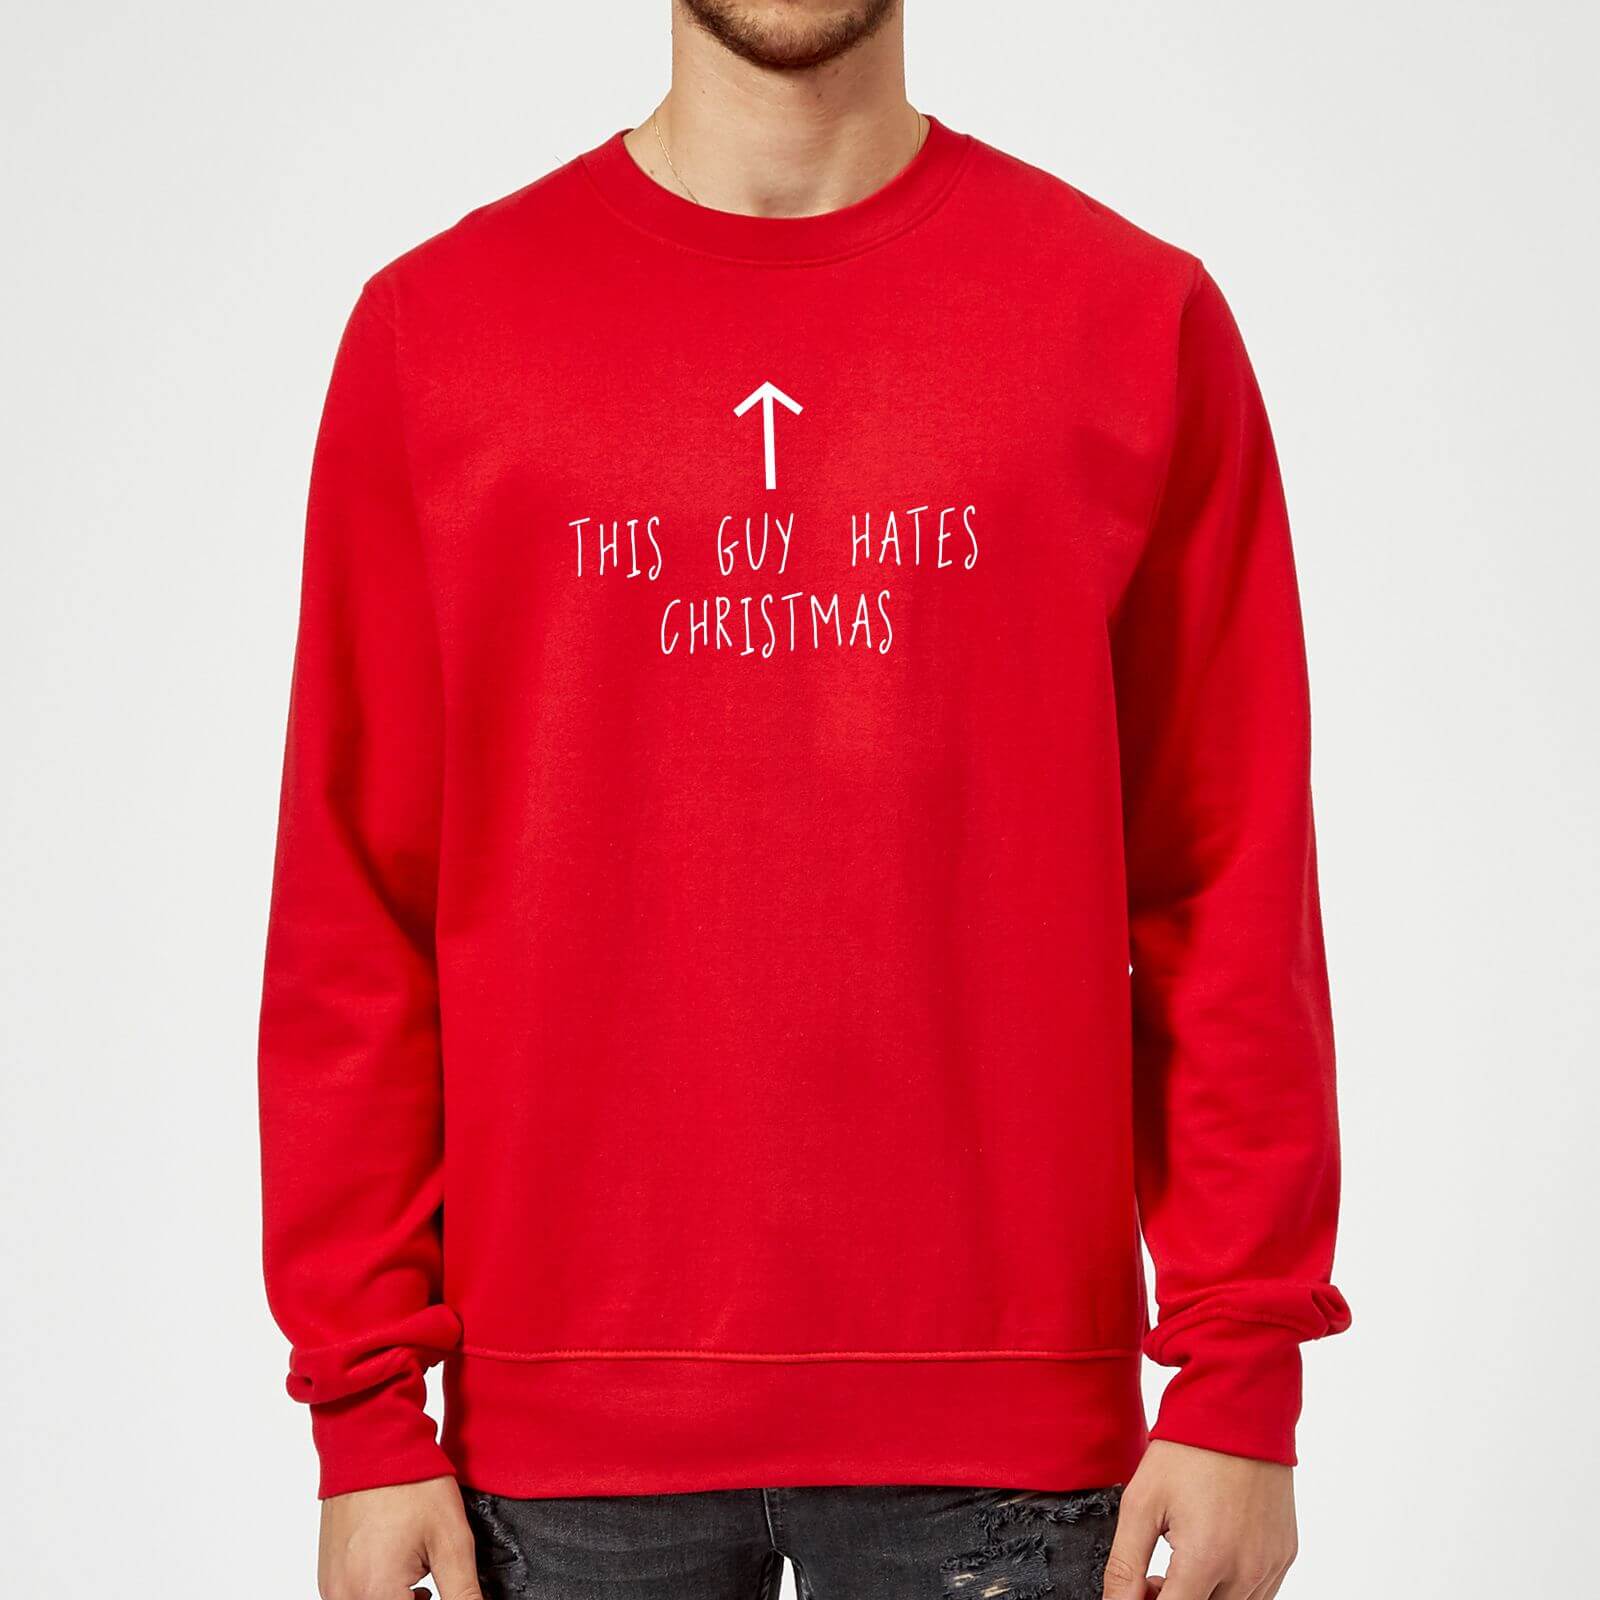 This Guy Hates Christmas Sweatshirt - Red - M - Red